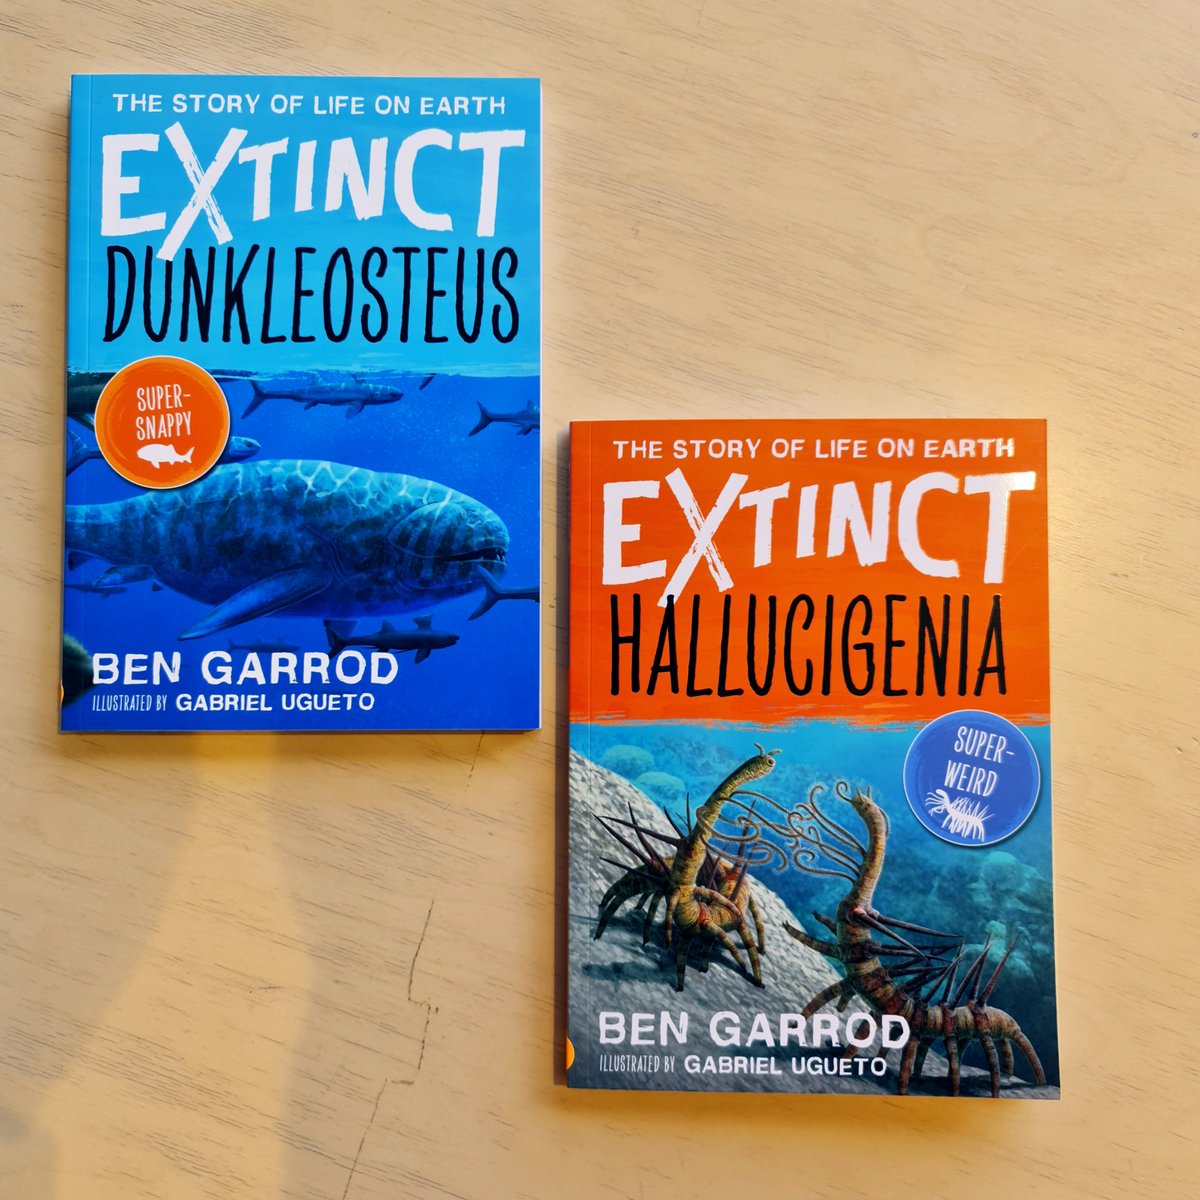 You can now get the first two books in the #Extinct series by @Ben_garrod in paperback! Meet the super-weird #Hallucigenia and the super-snappy #Dunkleosteus, featuring gorgeous illustrations by @SerpenIllus Start your paperback collection today: amzn.to/3BNlAQ4